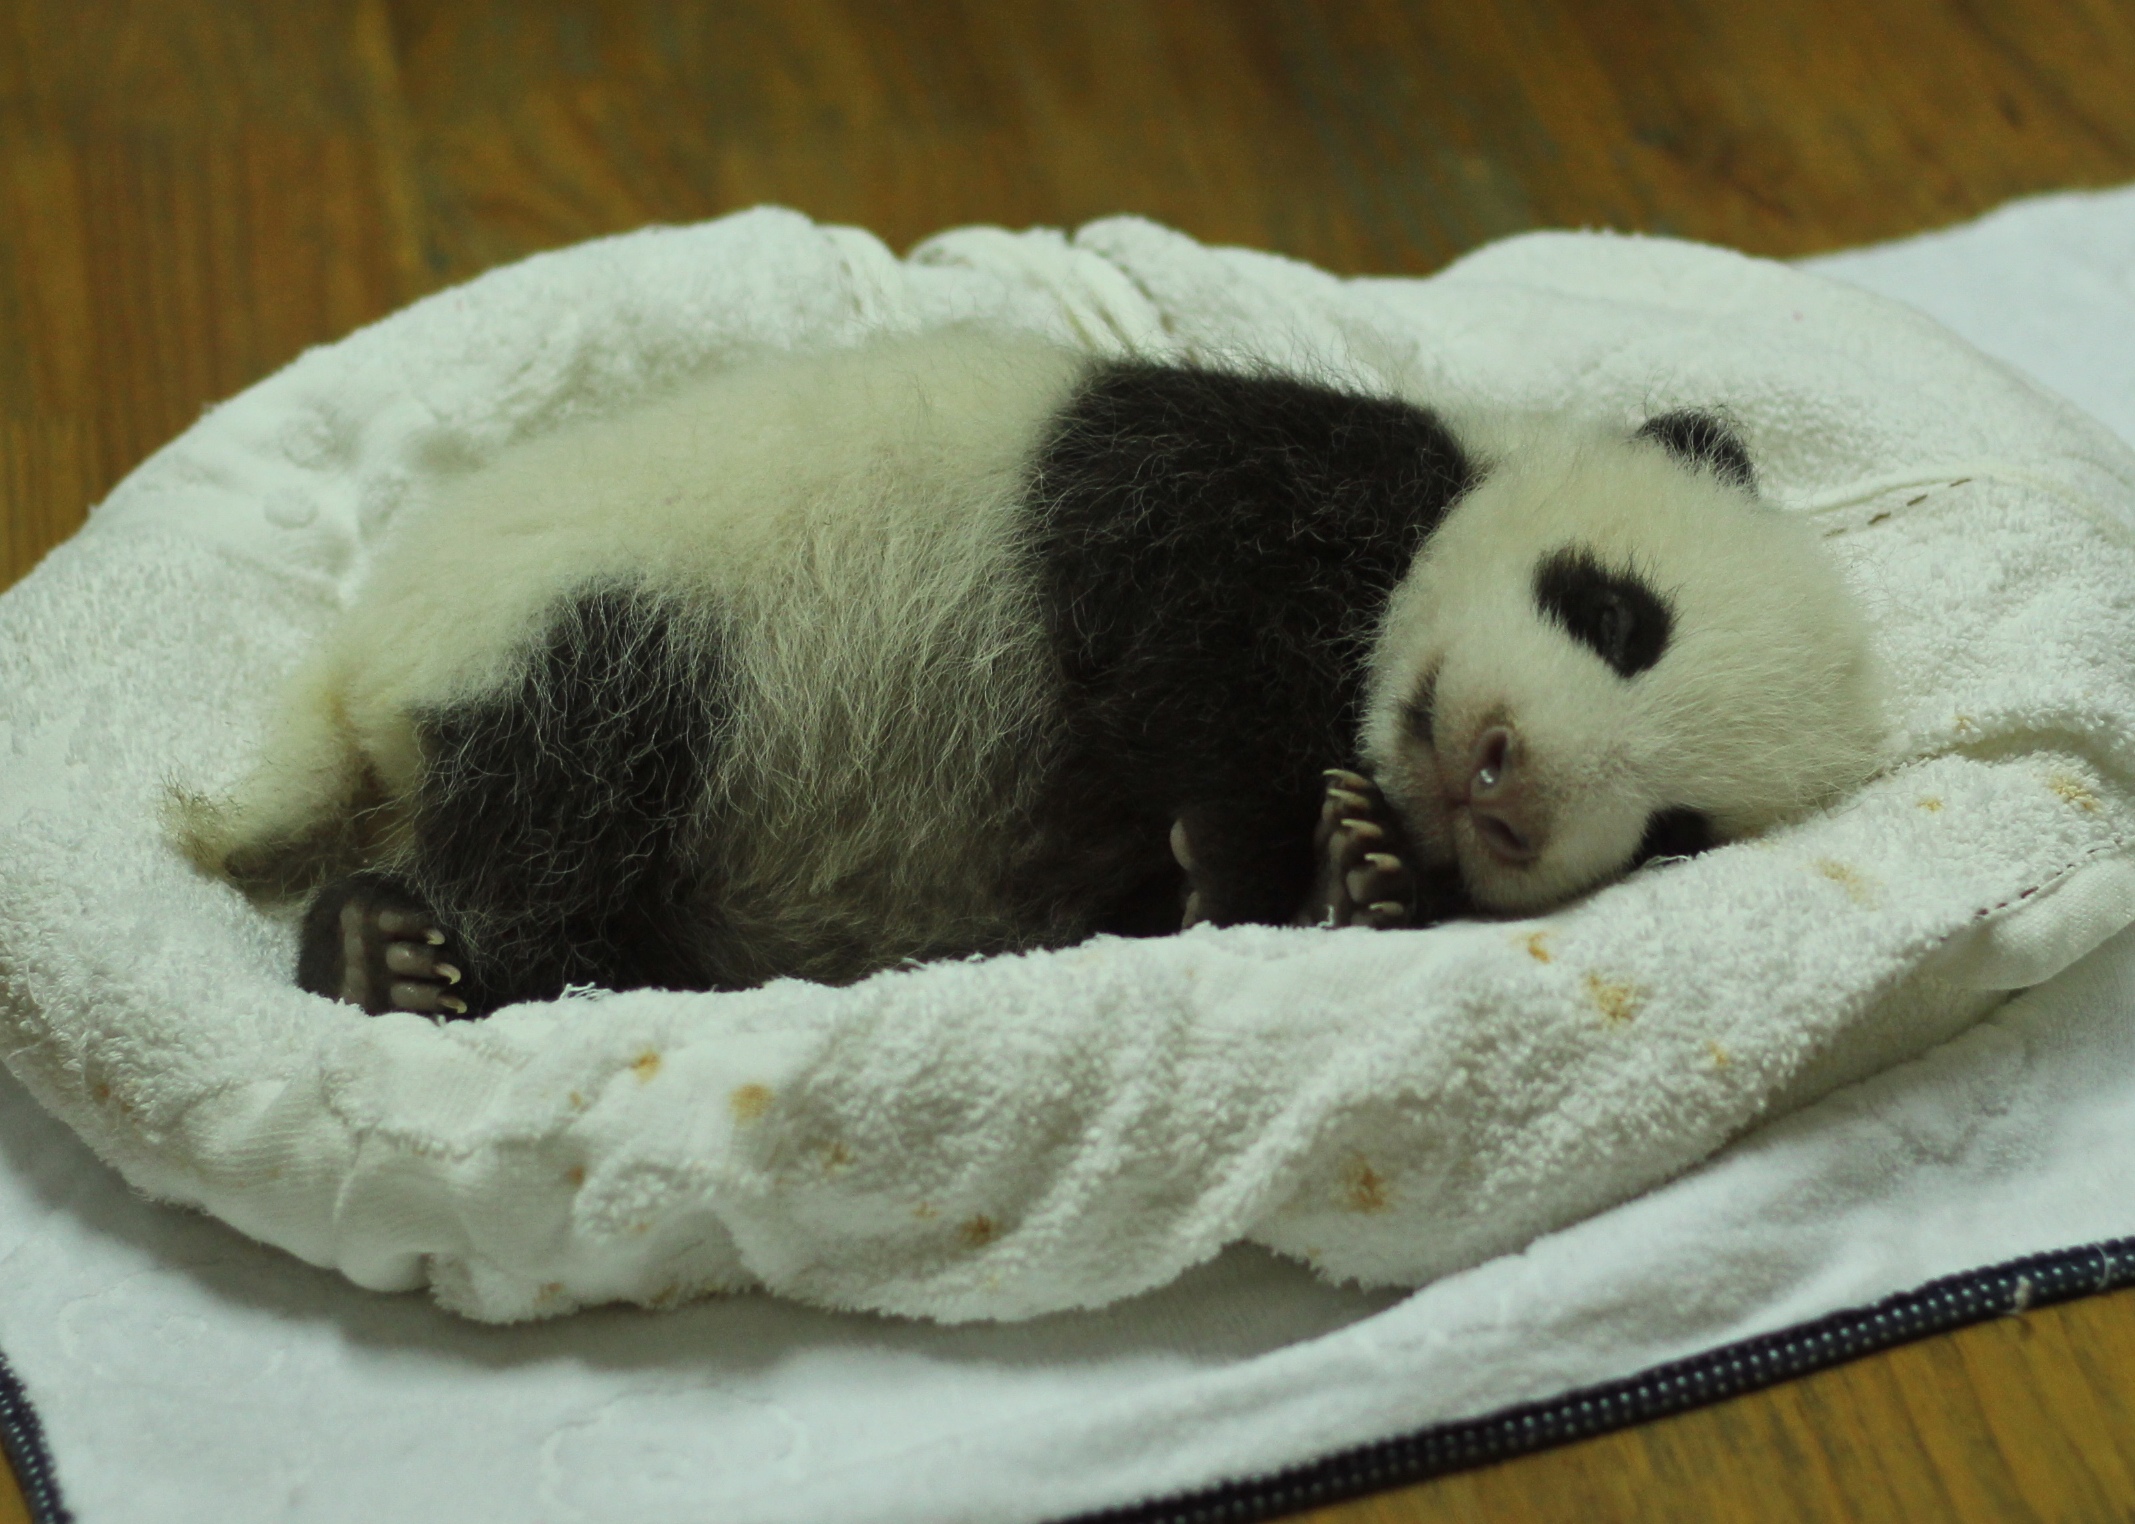 the baby panda bear is laying in its bed